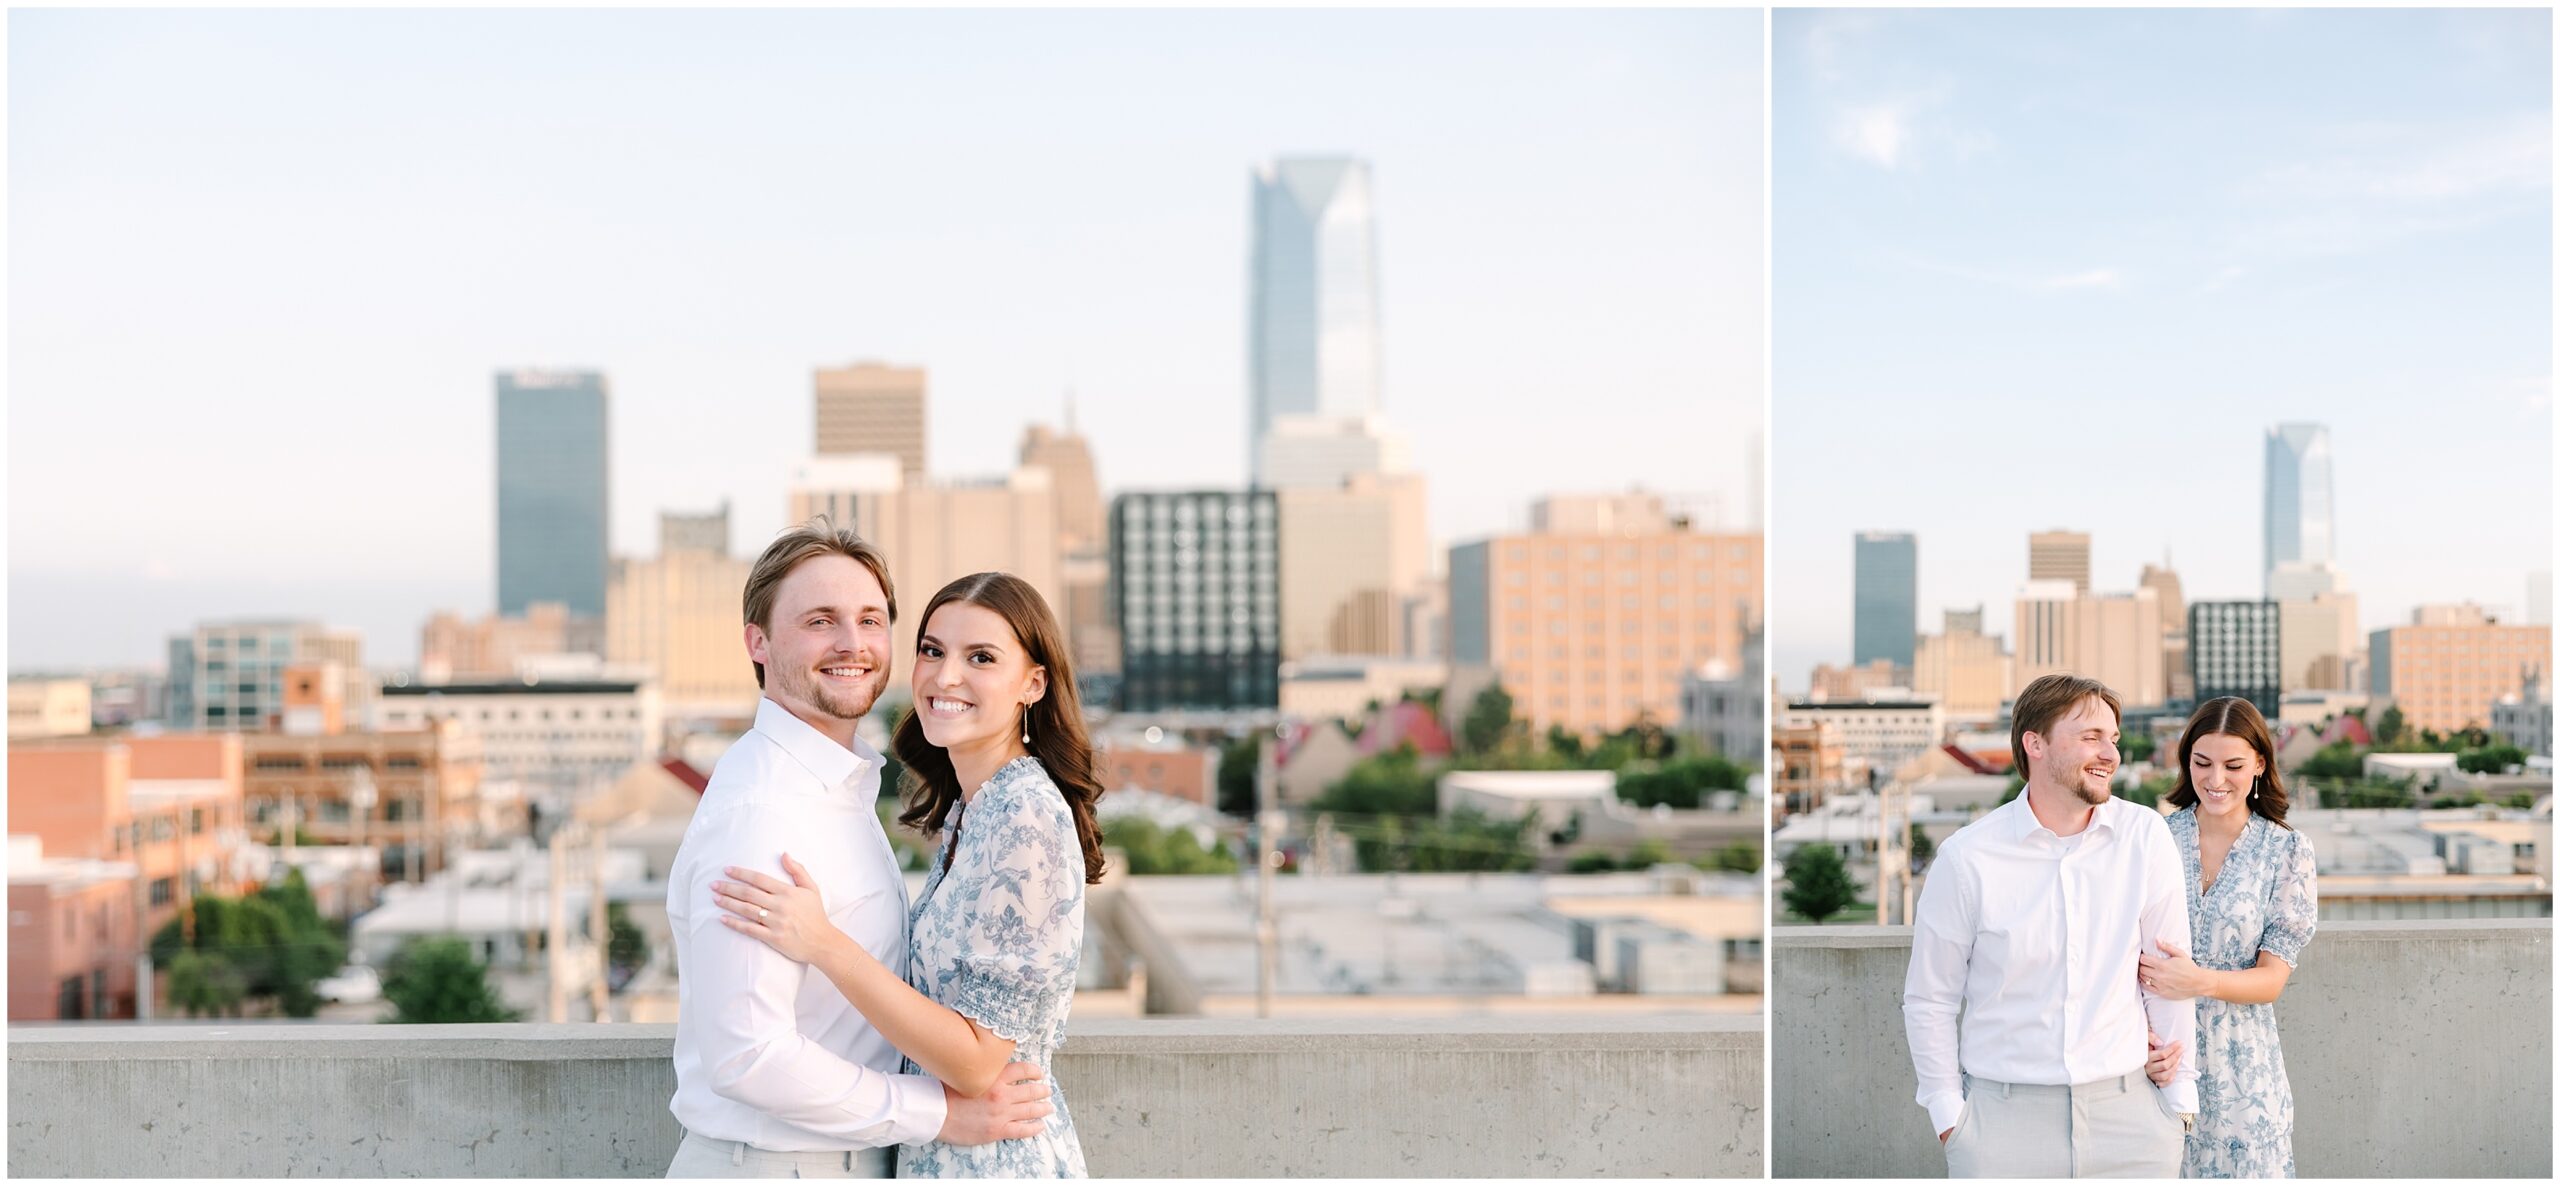 frontline church engagement photos, downtown okc engagement session, rooftop okc engagement session